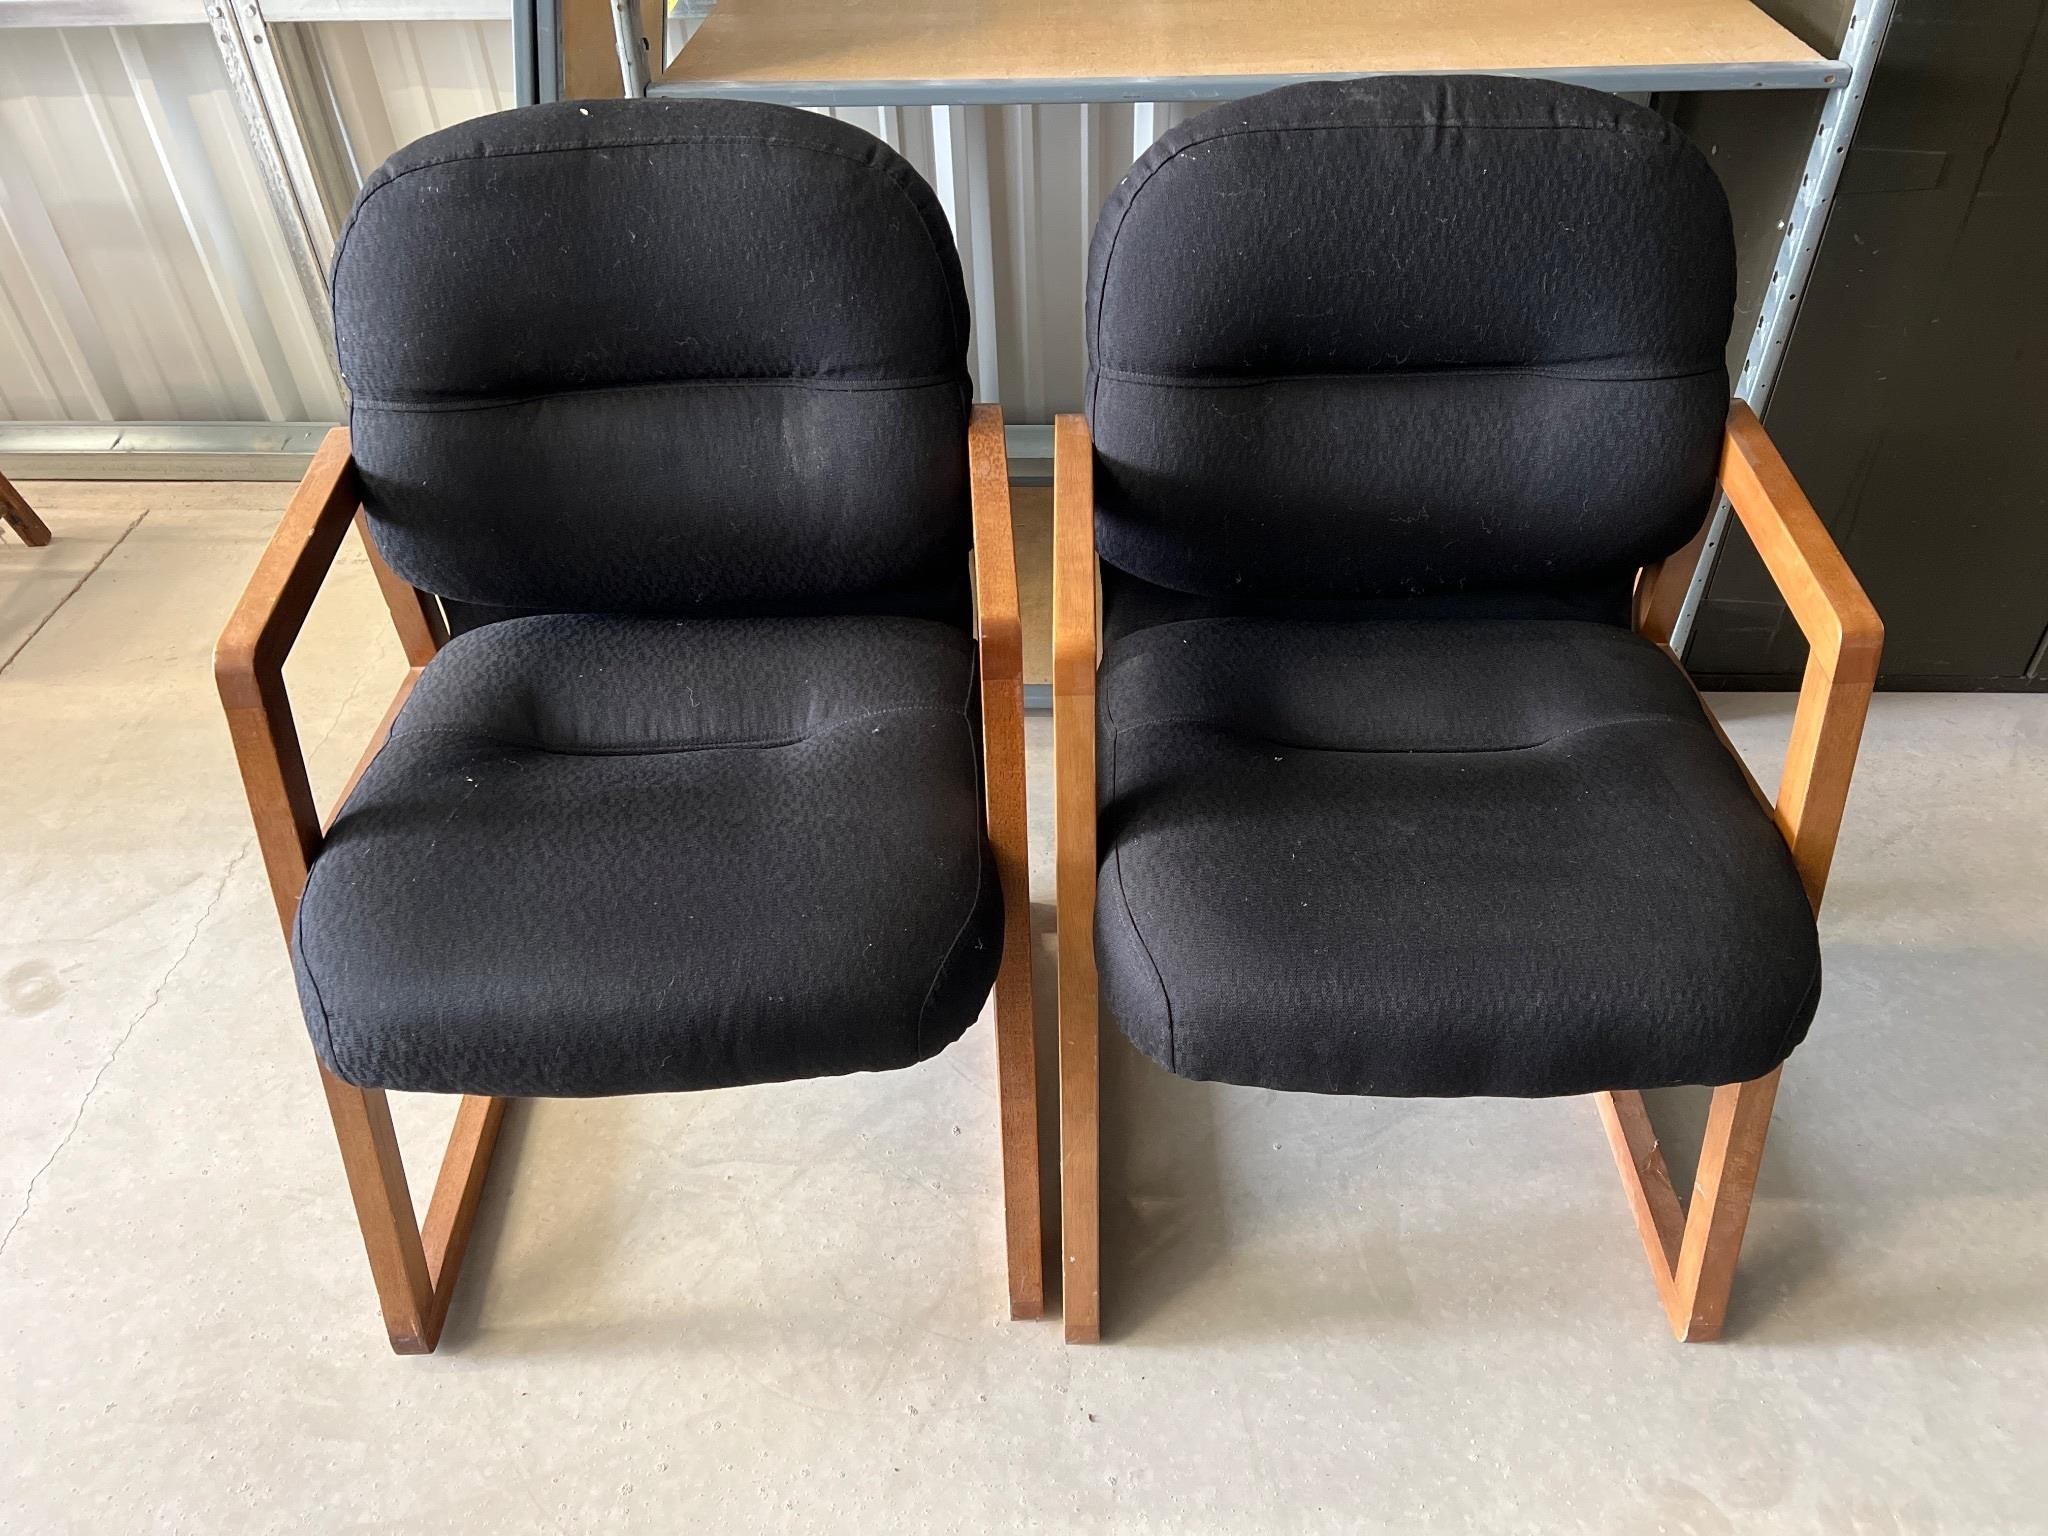 Two cushioned armchairs